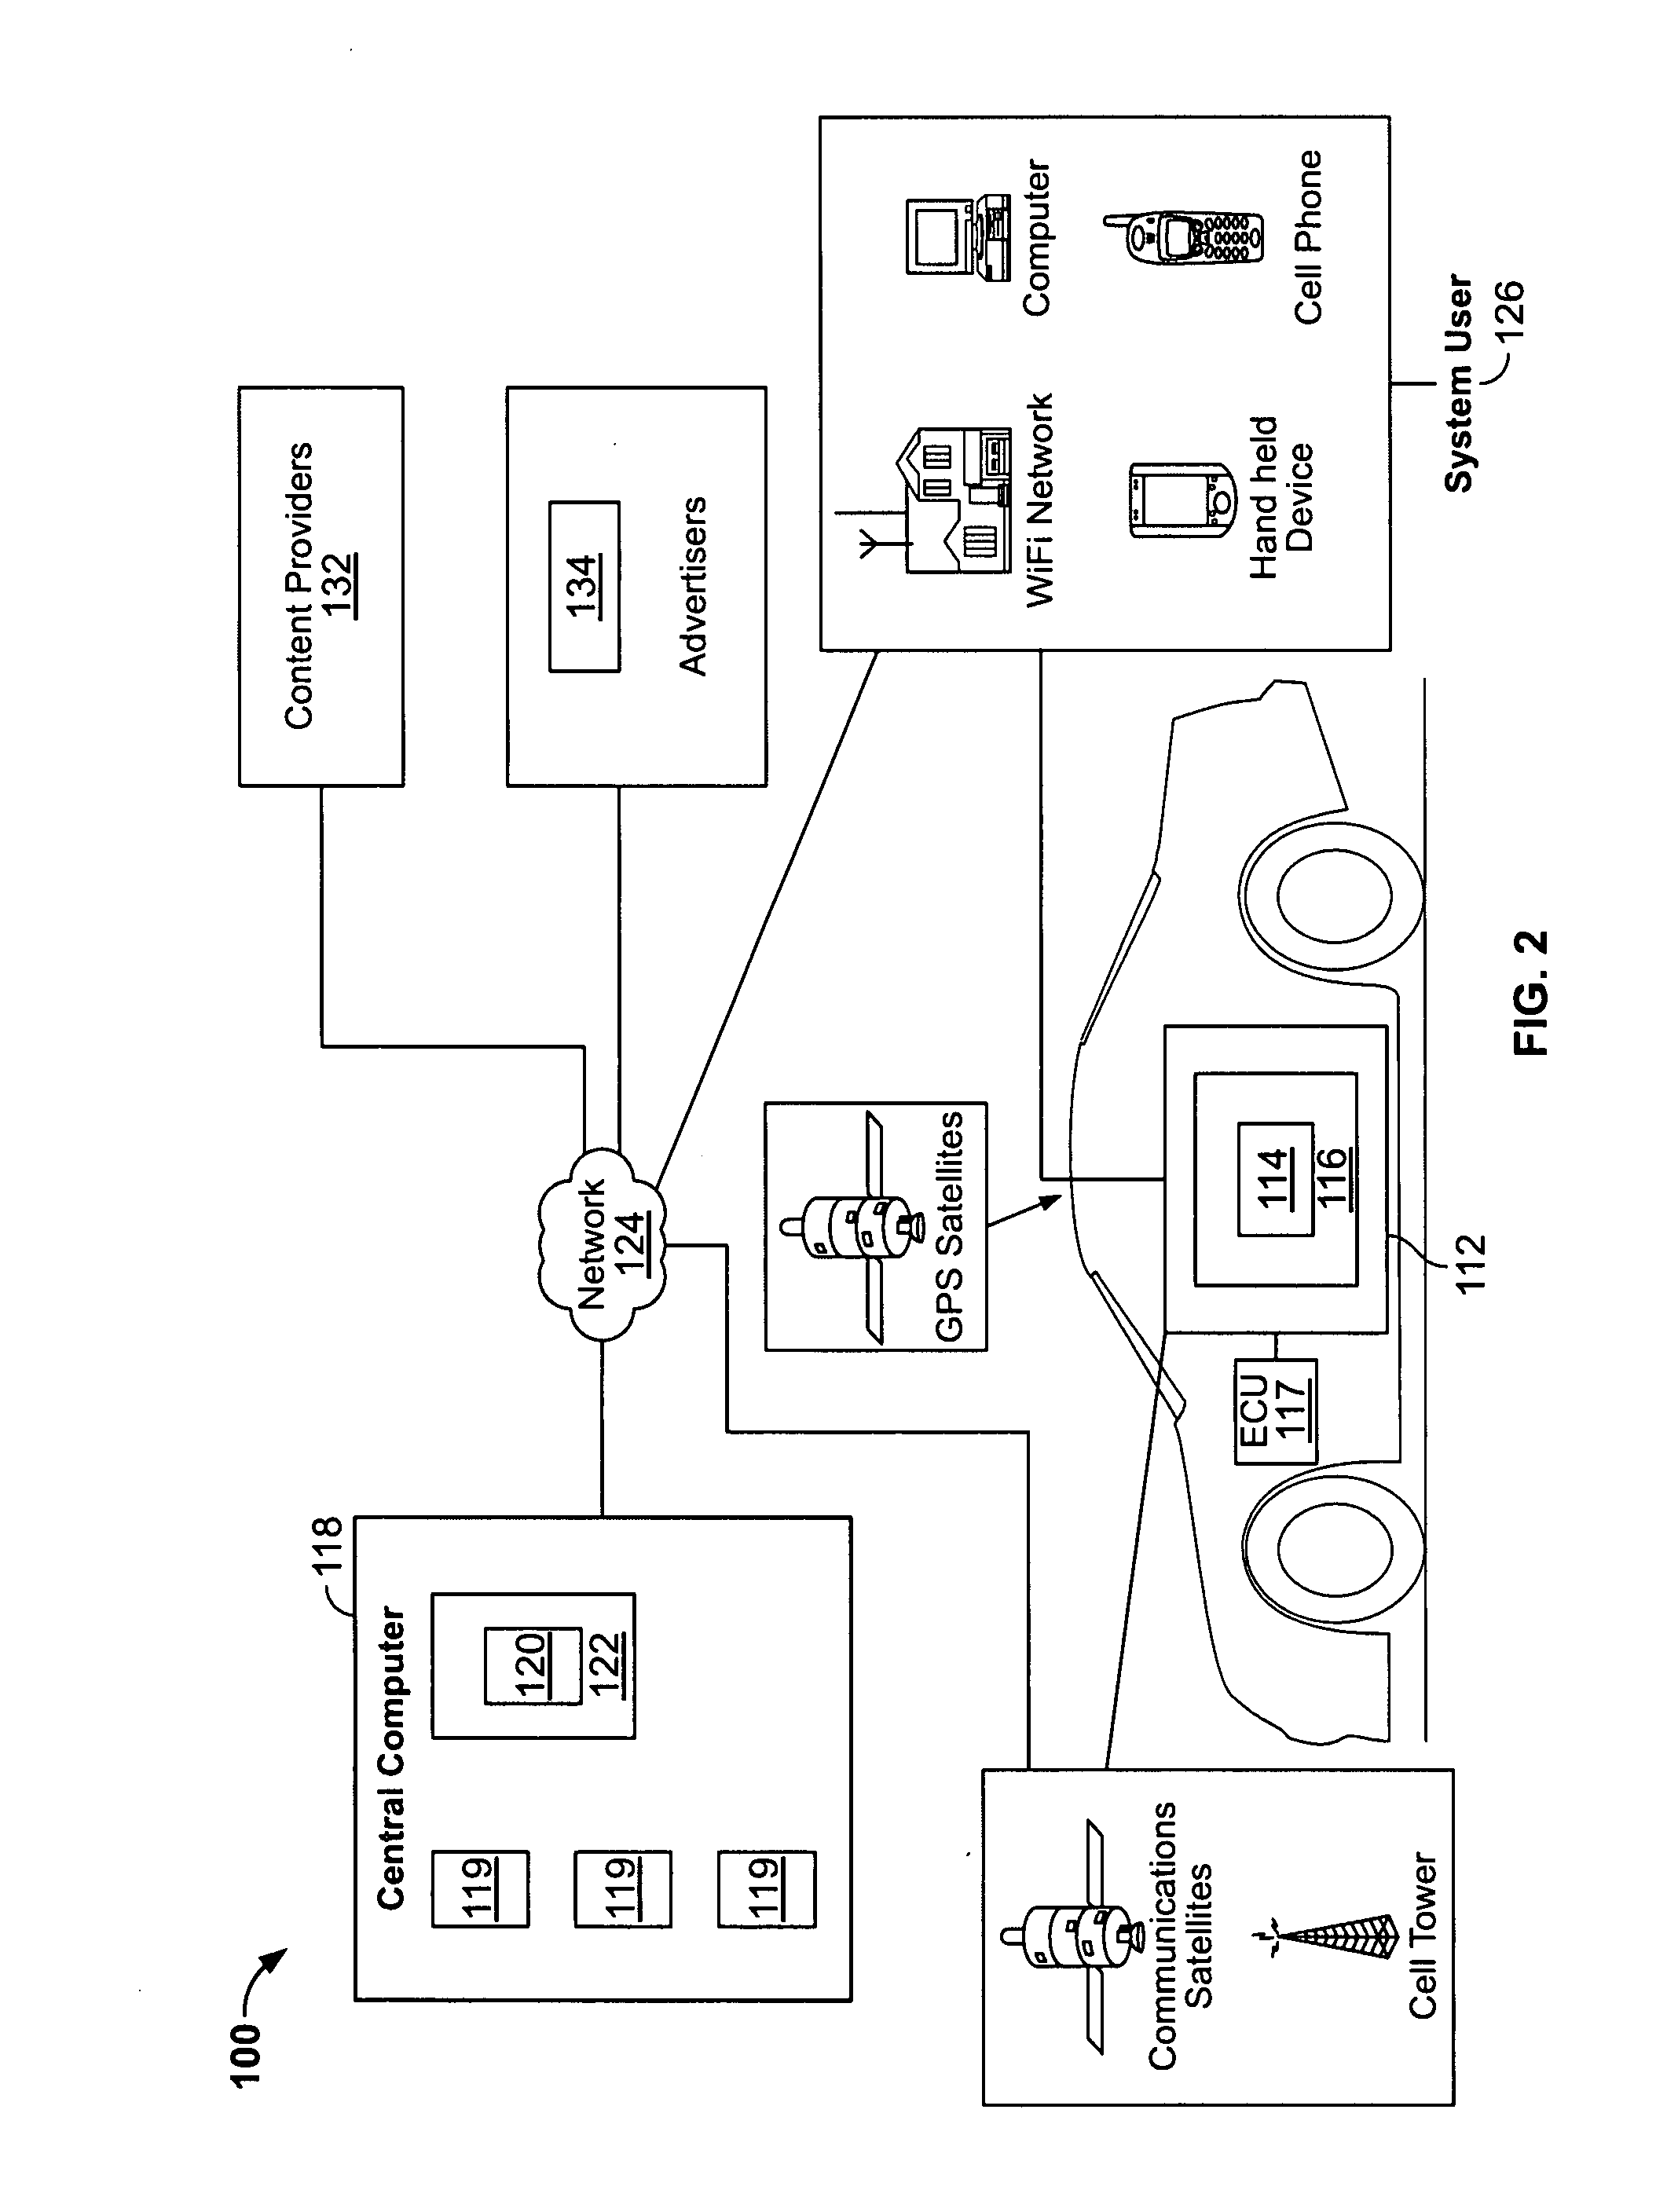 System and method for telematic marketing